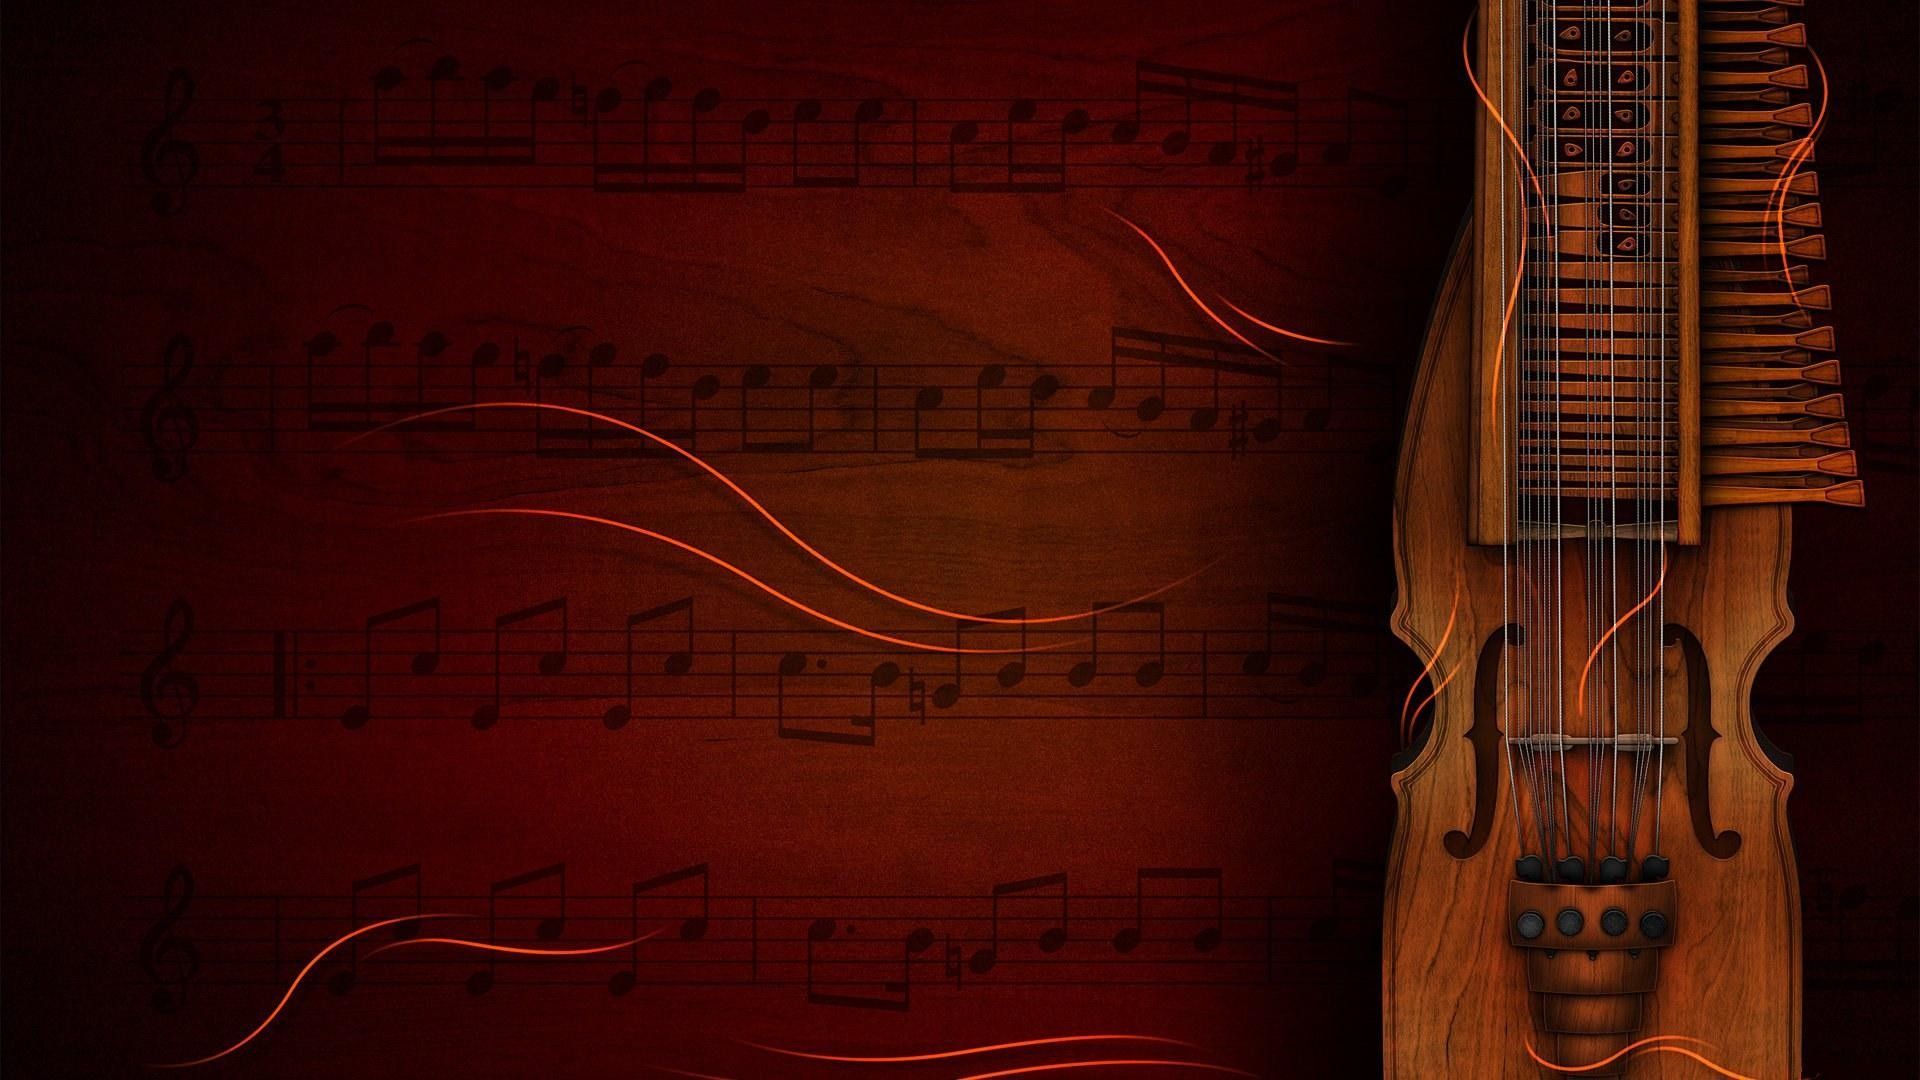 Musical Instruments Wallpapers